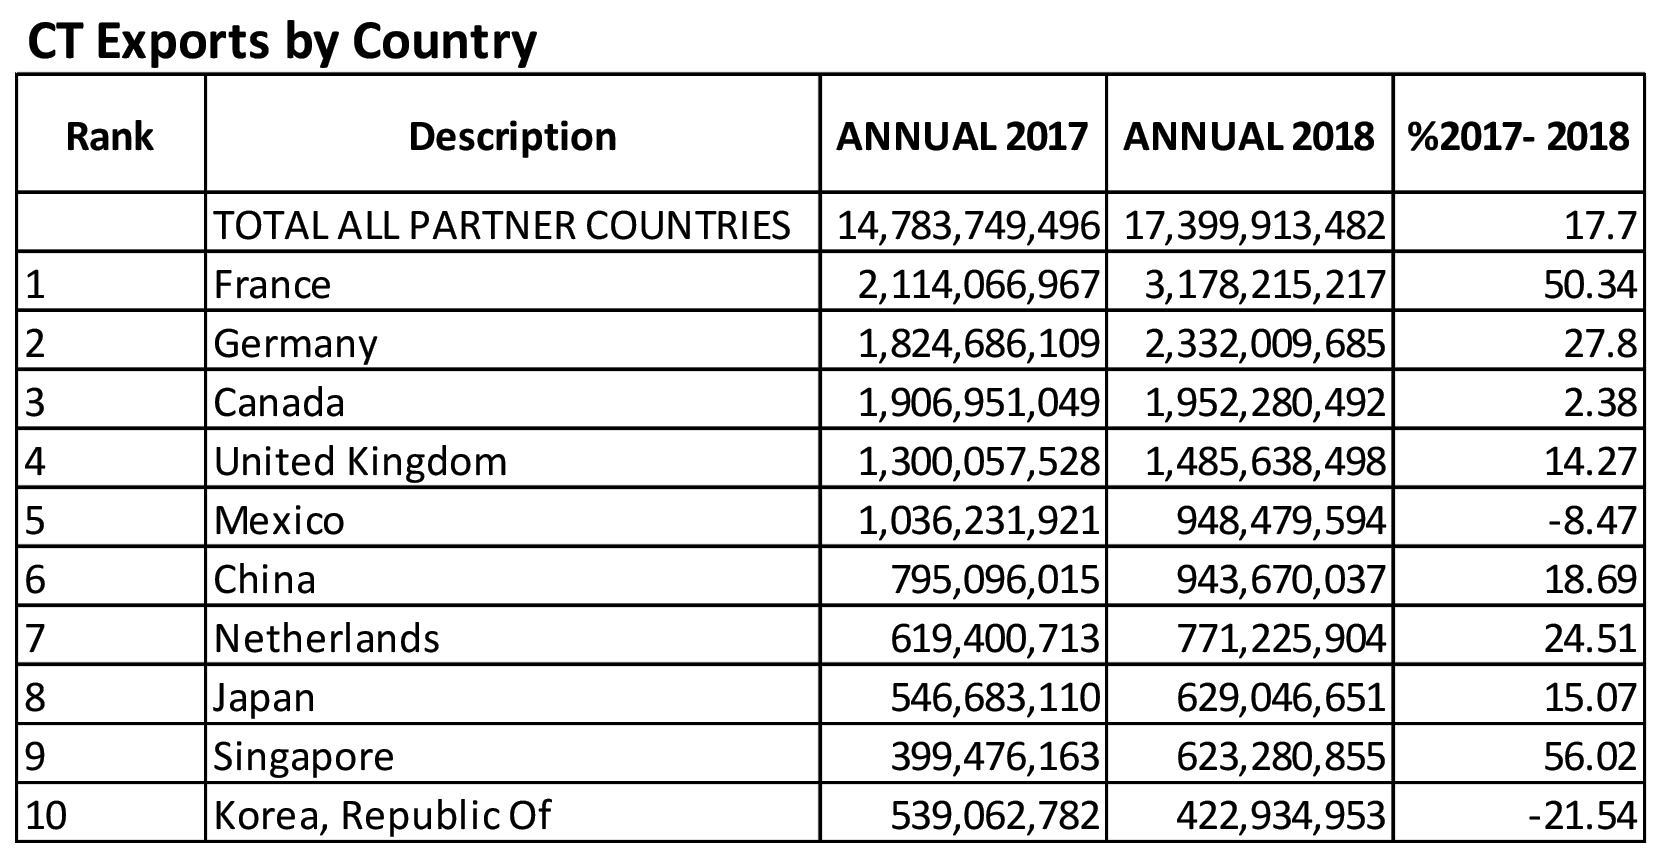 Chart 3. Connecticut Exports by Country